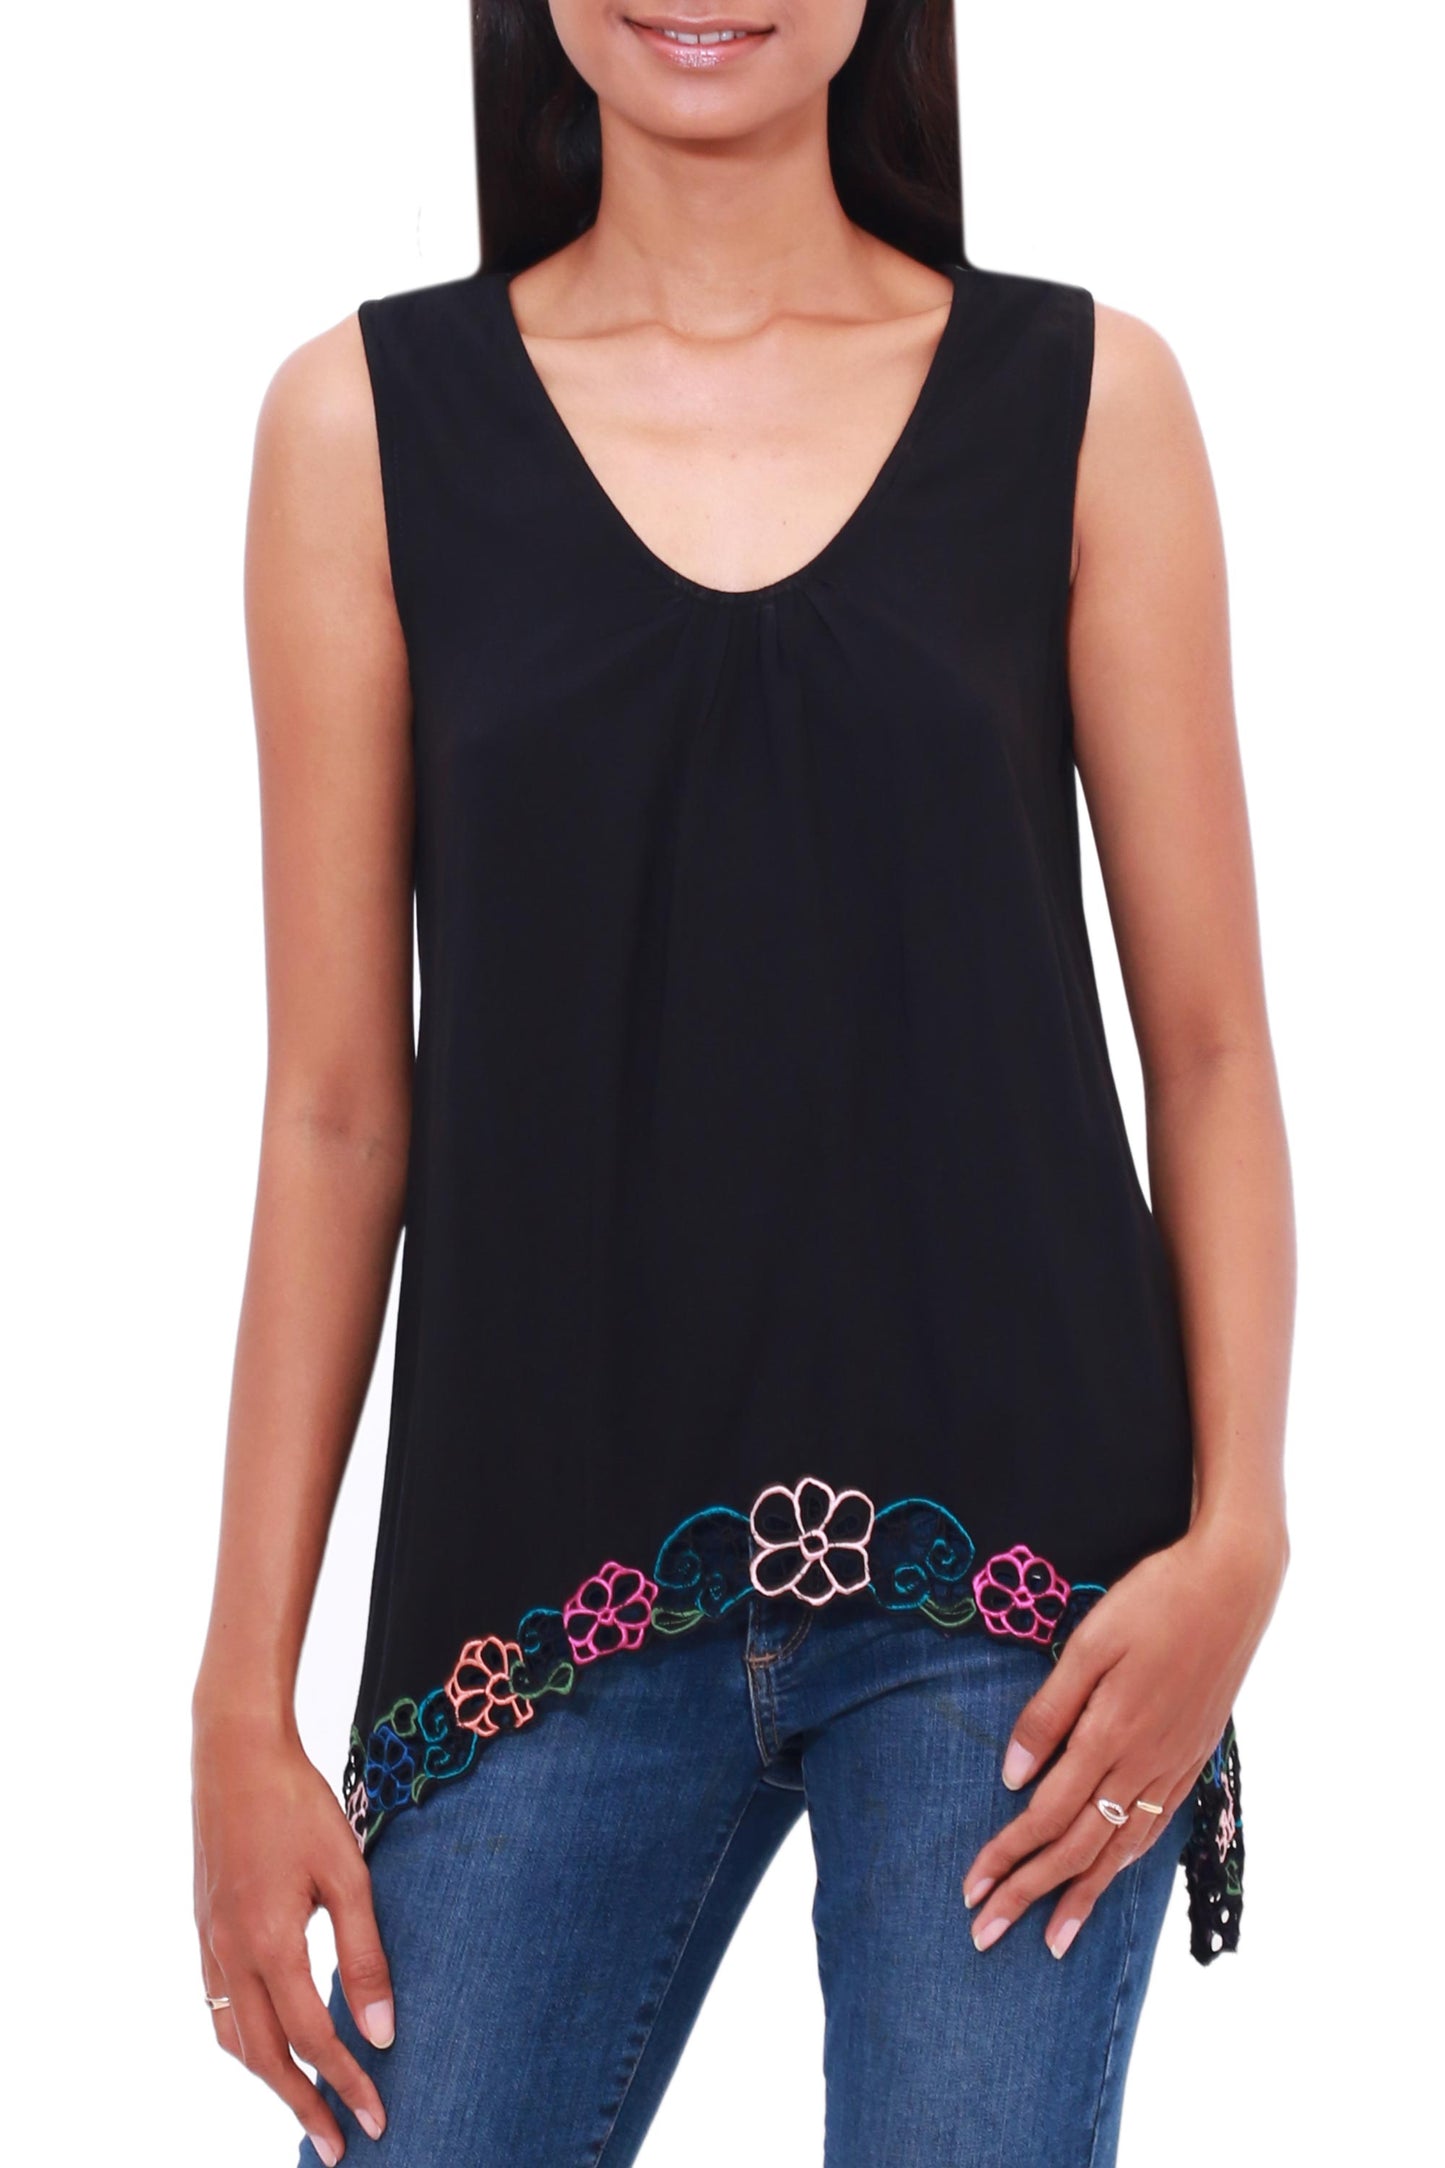 Flower Colors in Black Floral Embroidered Rayon Blouse in Black from Bali